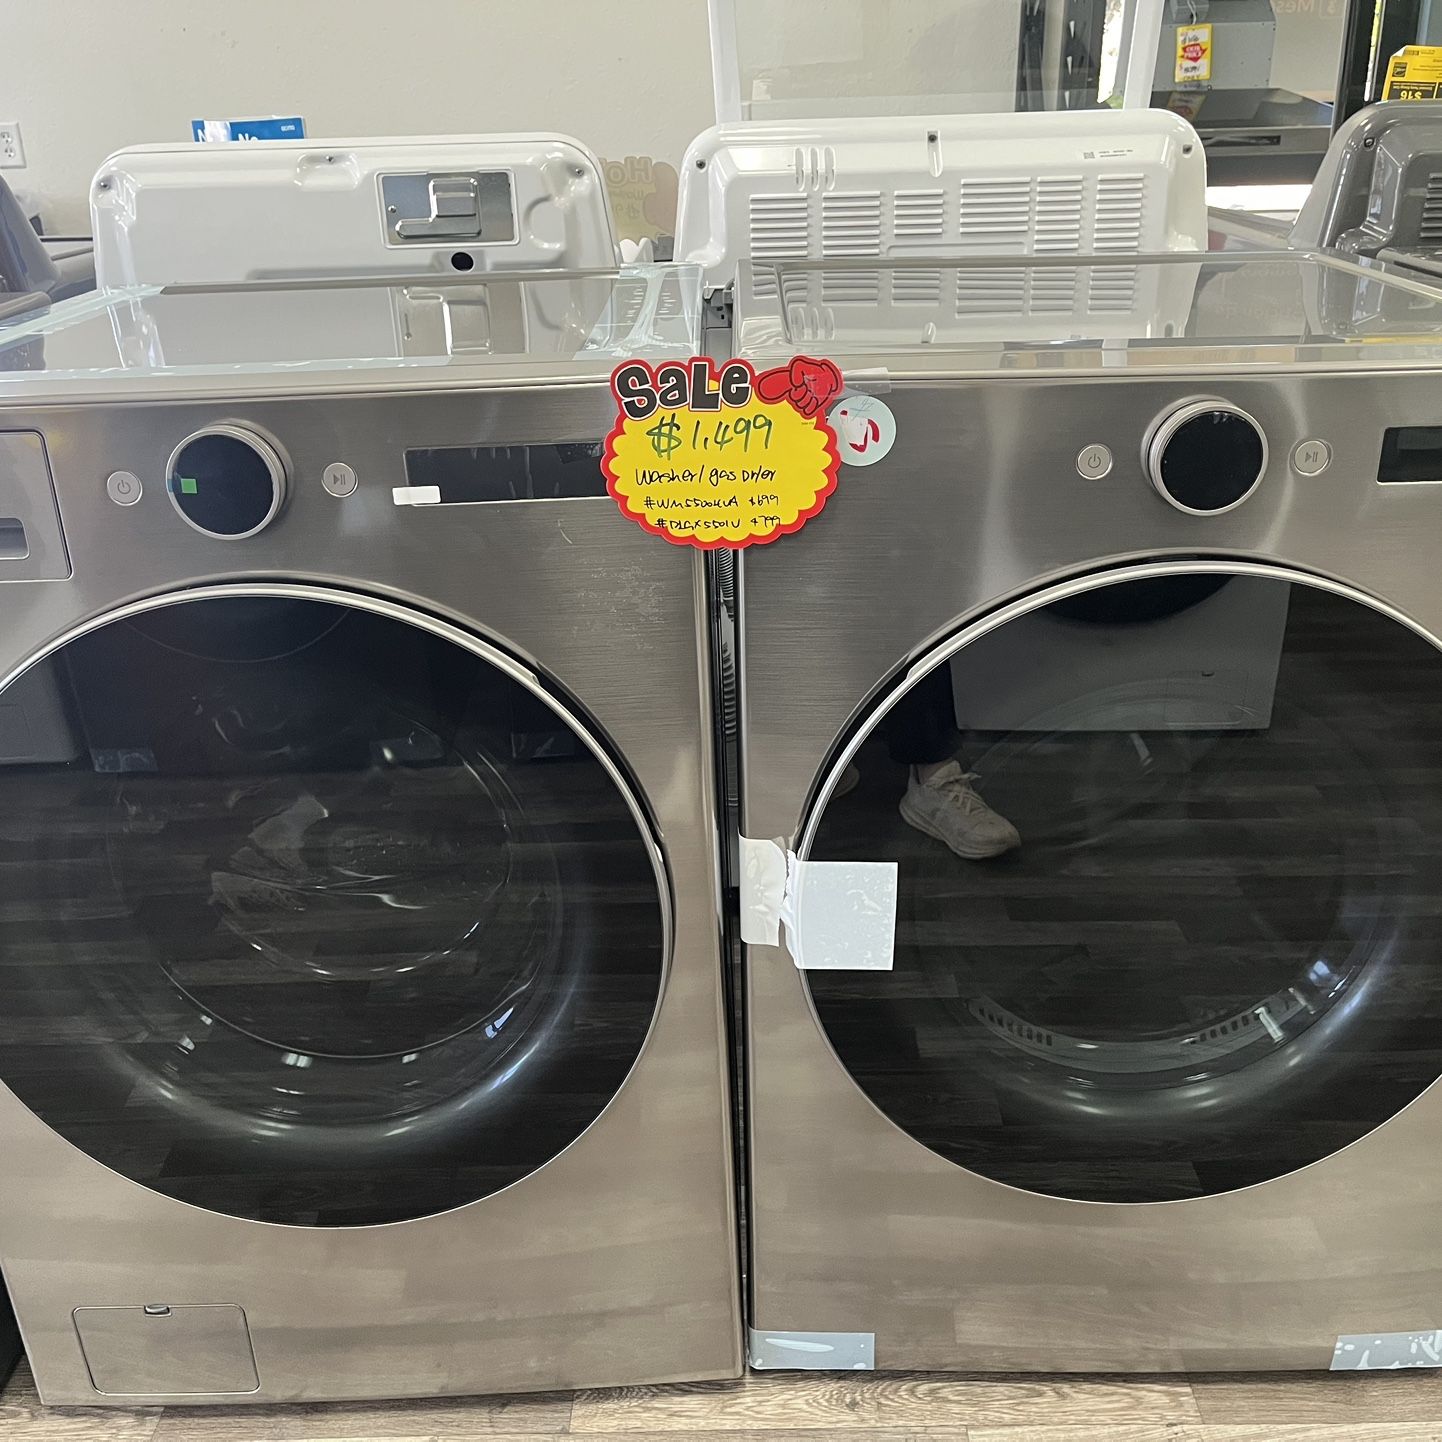 Limited Time/ Stackable Washer And Gas Dryer Set 